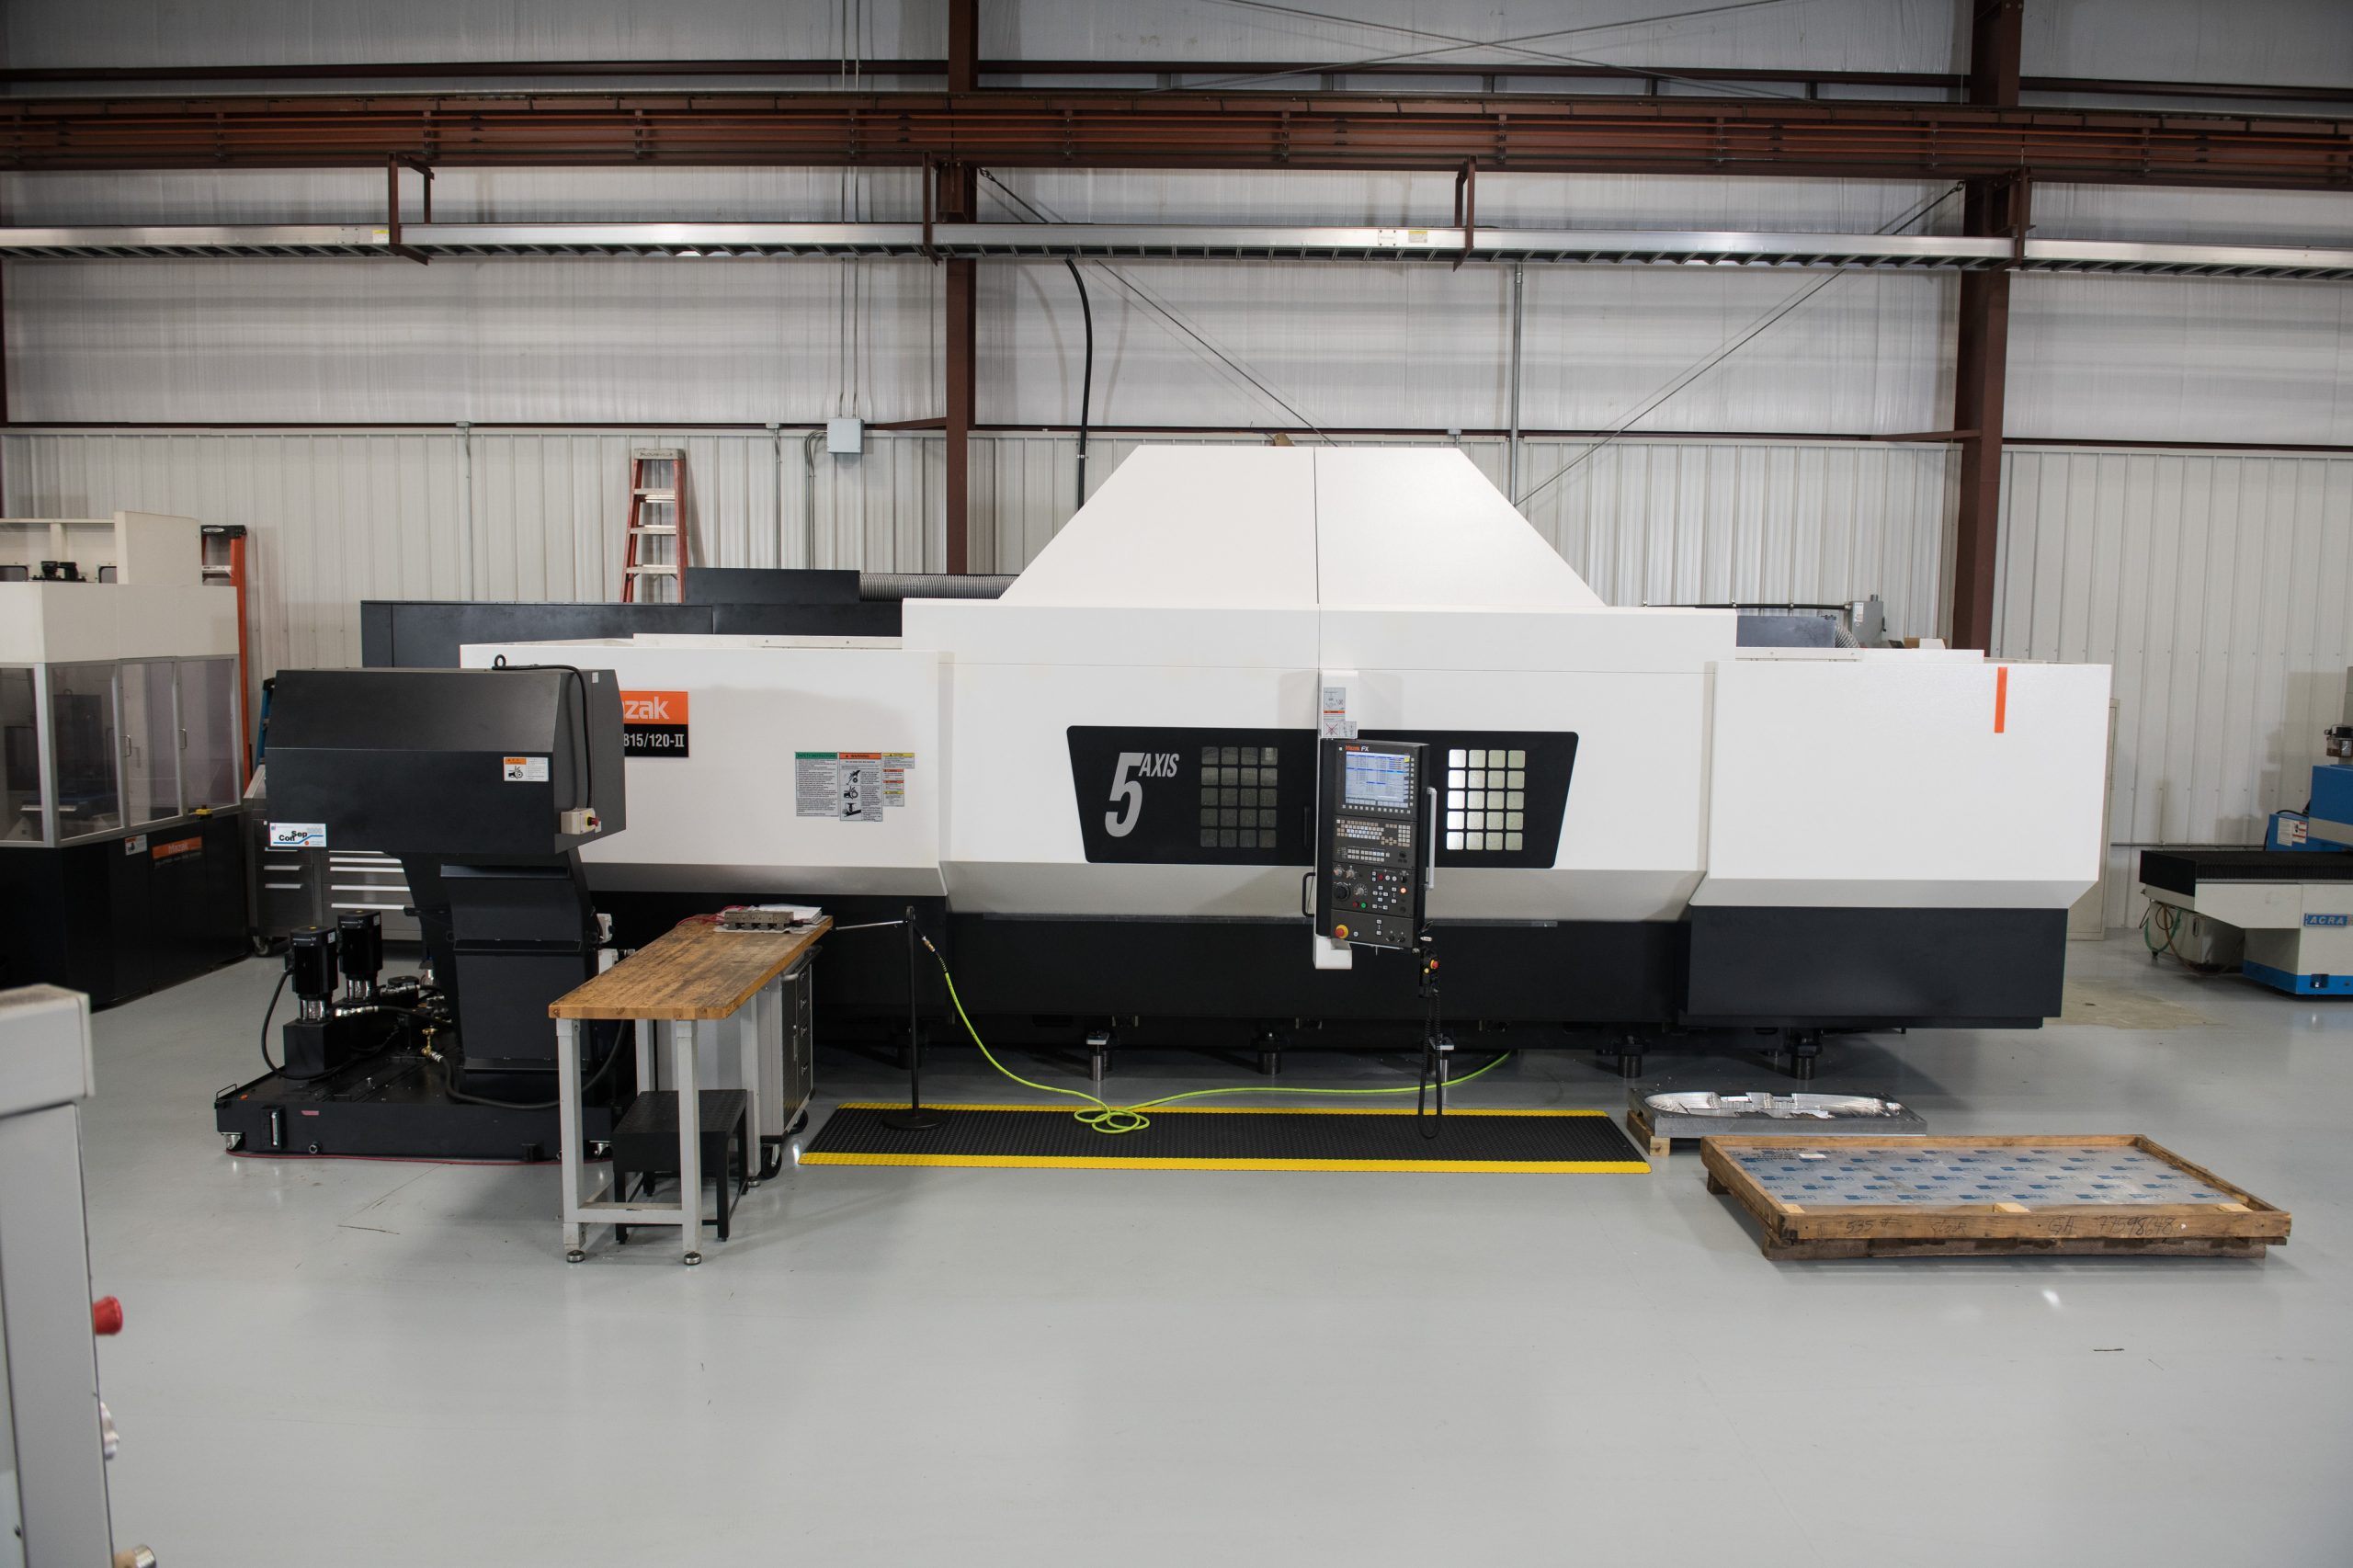 Aerotech Machining Featured in Aerospace Manufacturing